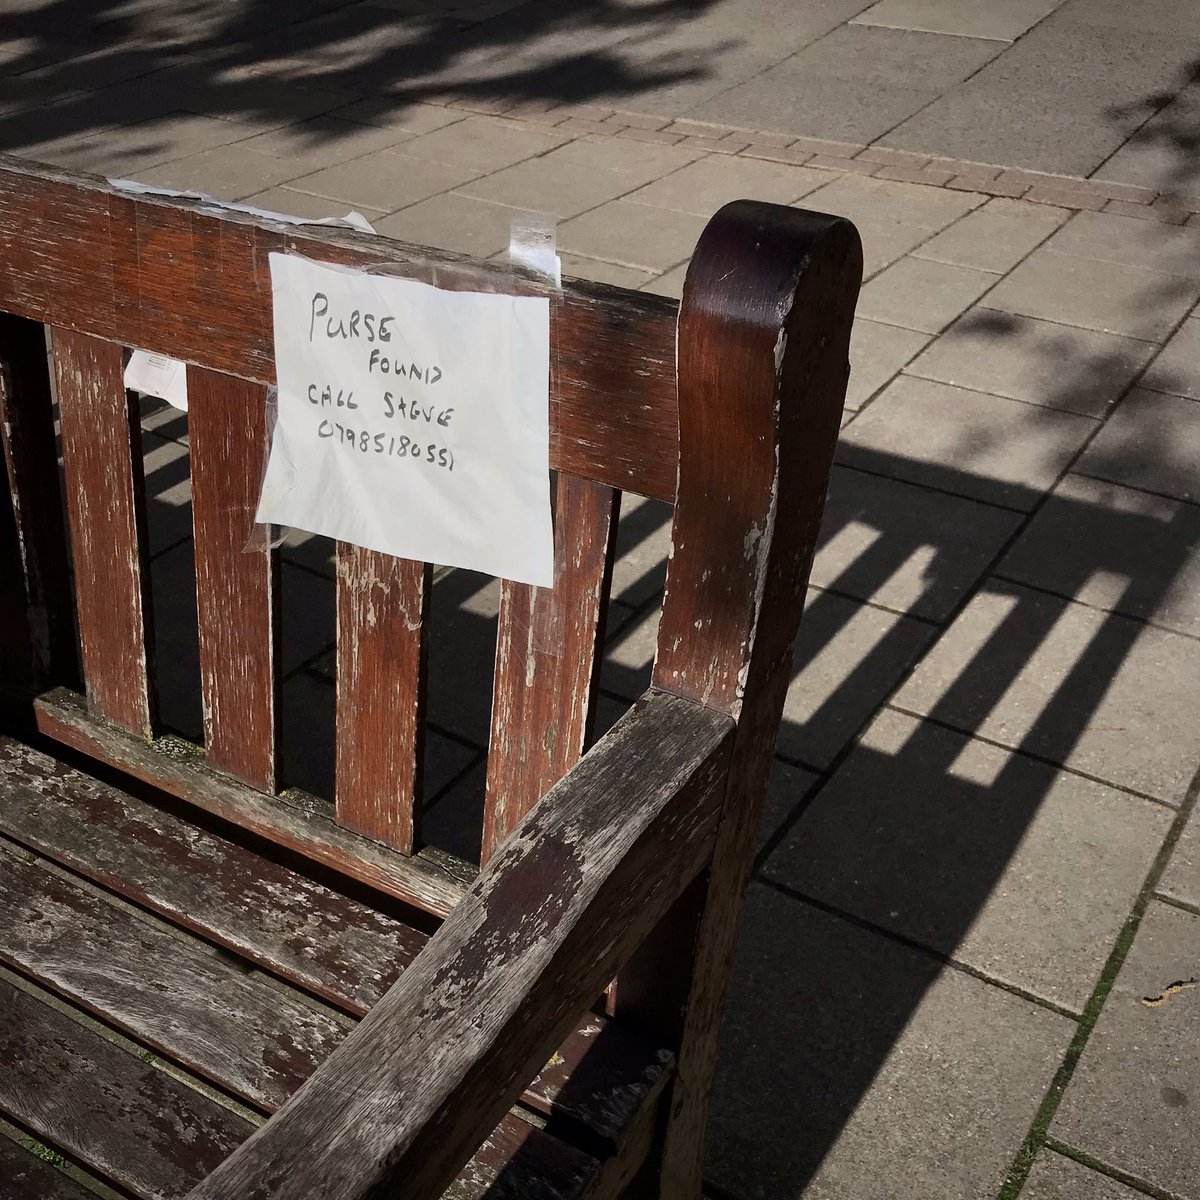 Hope Steve gets purse back to owner… from a stroll down Wanstead High Street. #wanstead #streetphotography